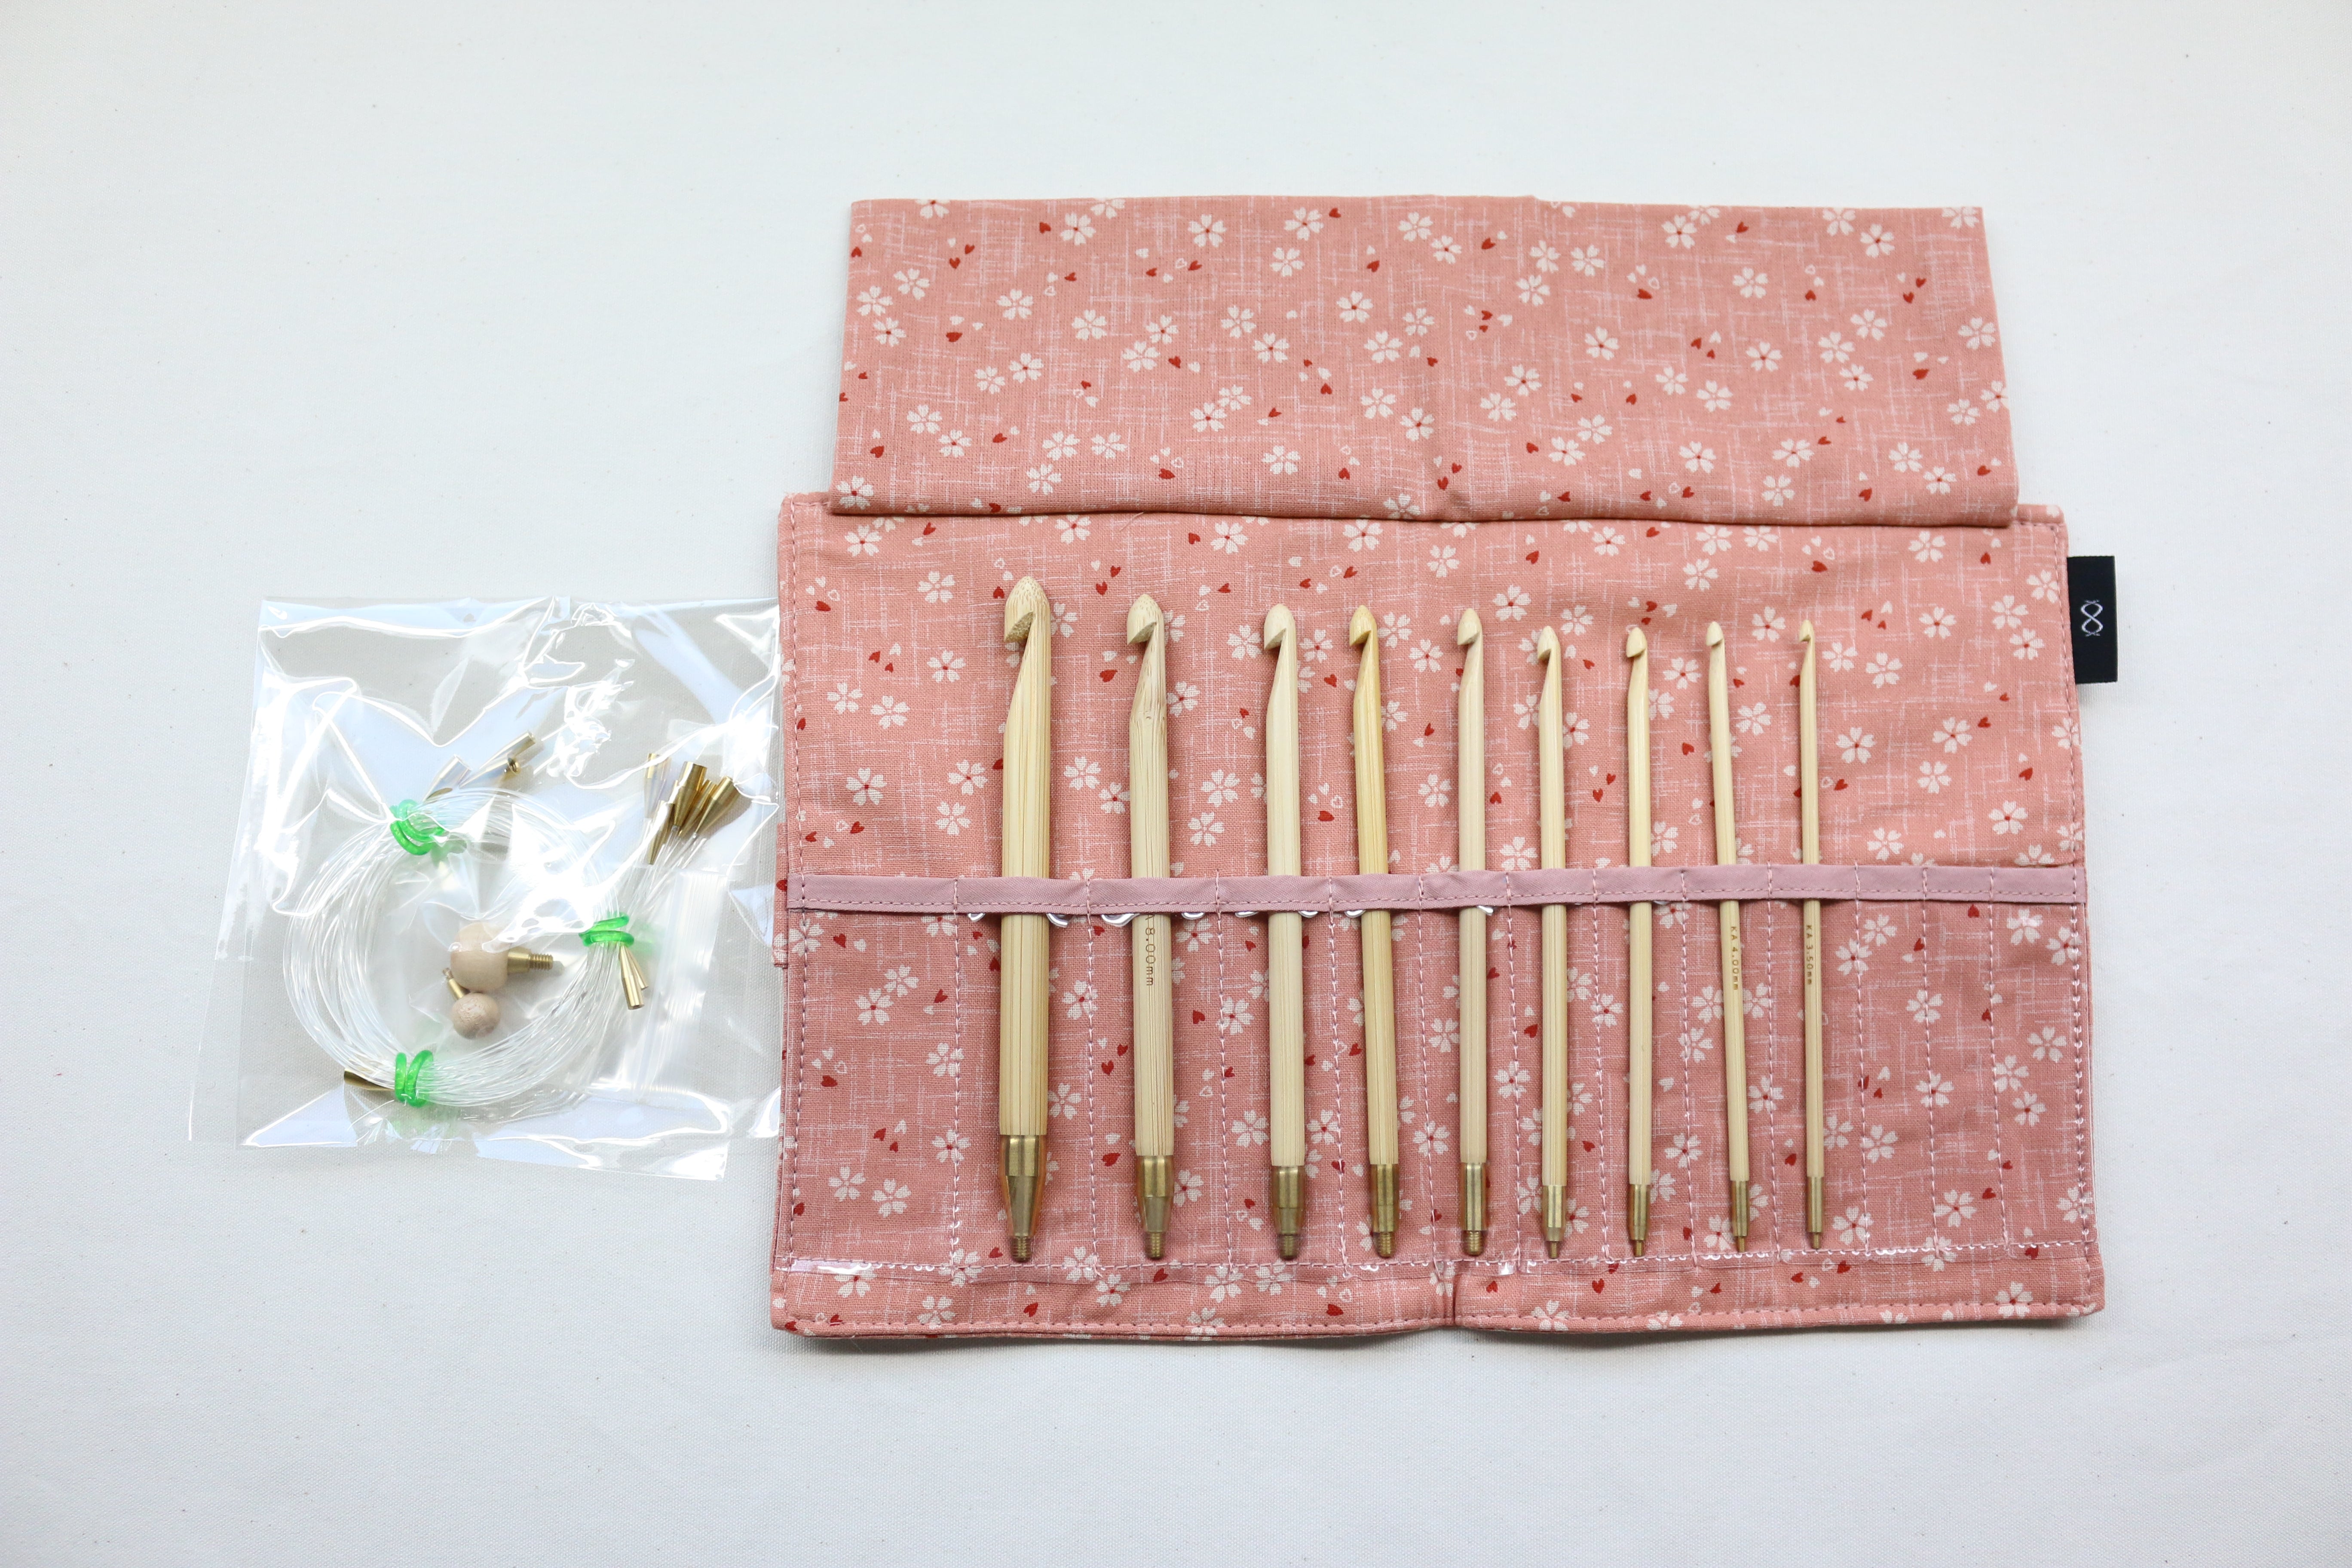 https://needles-and-wool.com/cdn/shop/products/57837-03_Interchangeable_Crochet_Hook_Set_9_sizes_EU_Nordic_-_Cherry_Blossom_Pink_Inside_with_Cords_Stppers.jpg?v=1577994116